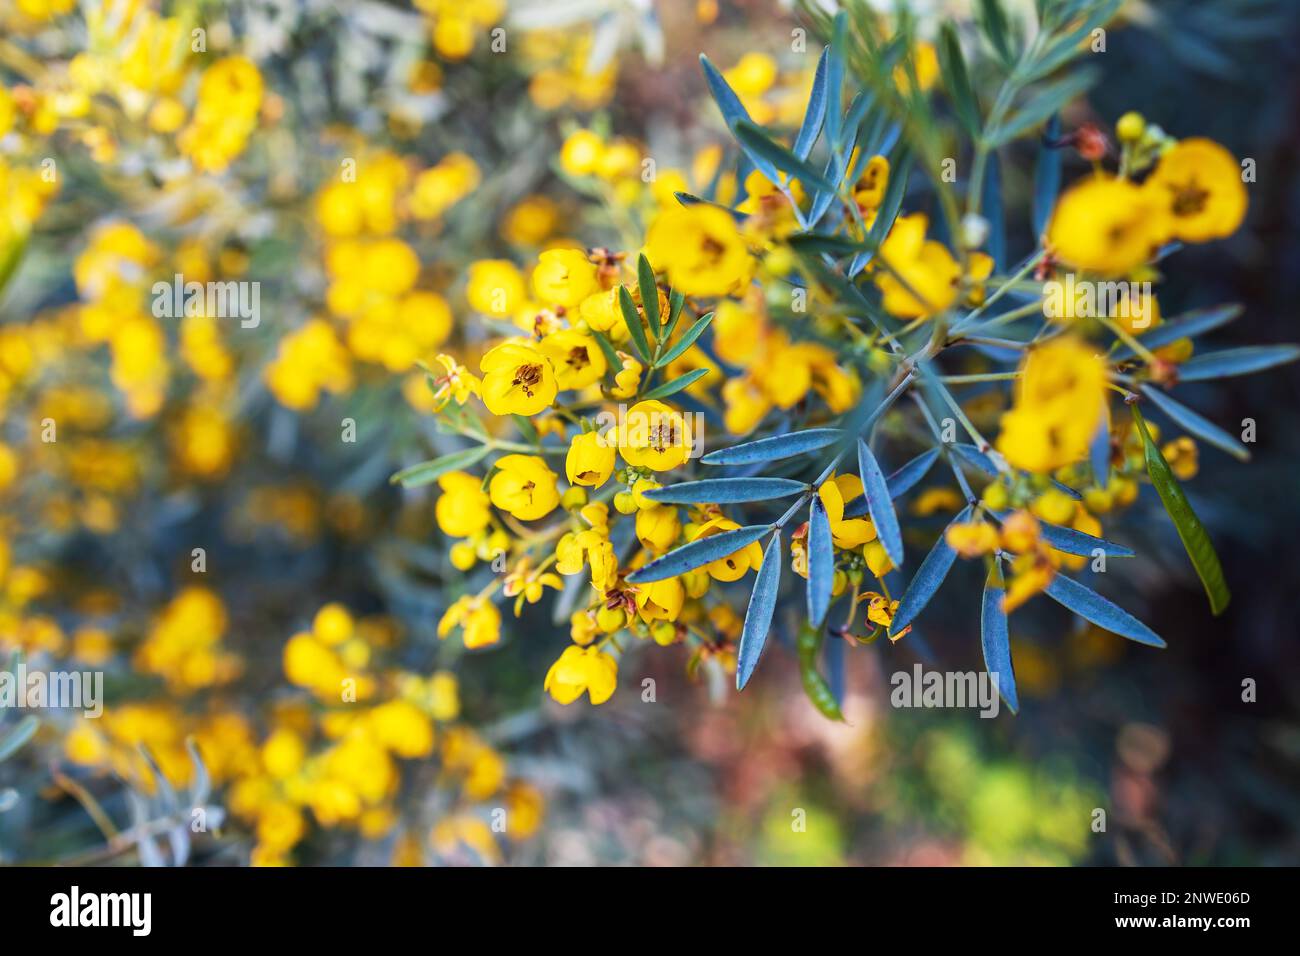 Senna artemisioides, the wormwood senna, is a species of flowering plant in the pea family Fabaceae. Stock Photo